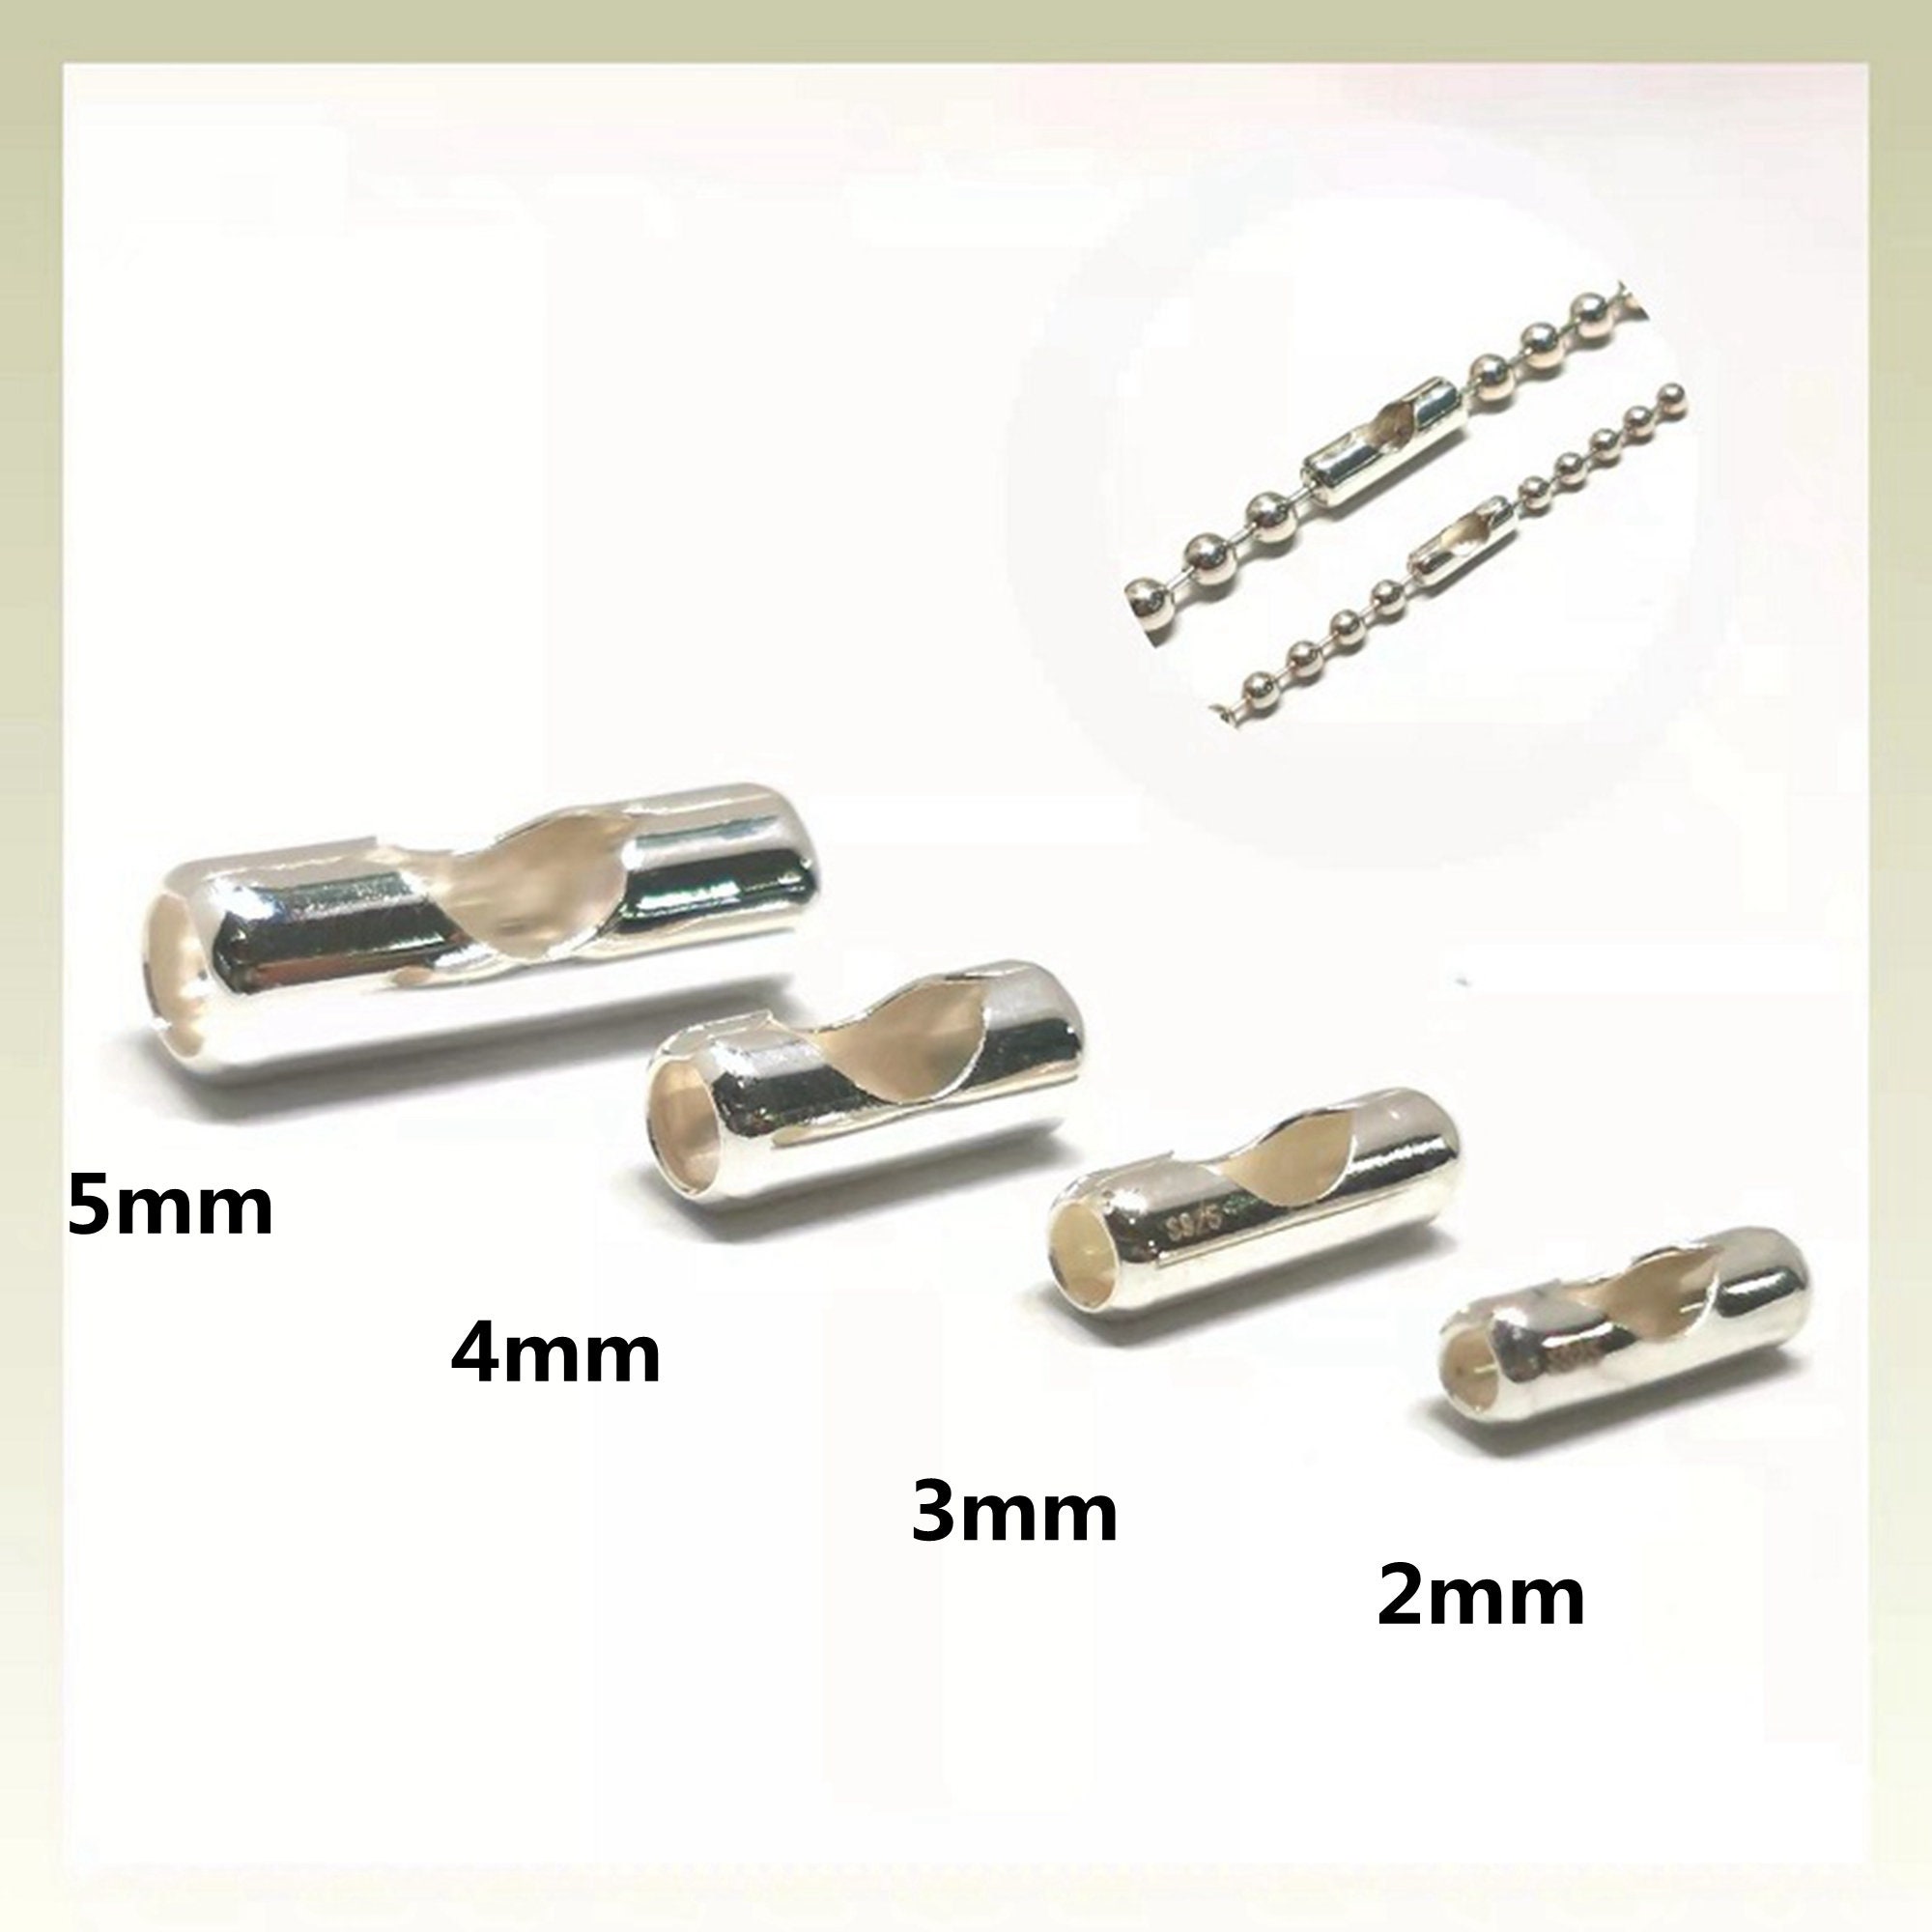 Fasteners / Connectors for Ball Chain ø 2,5 mm